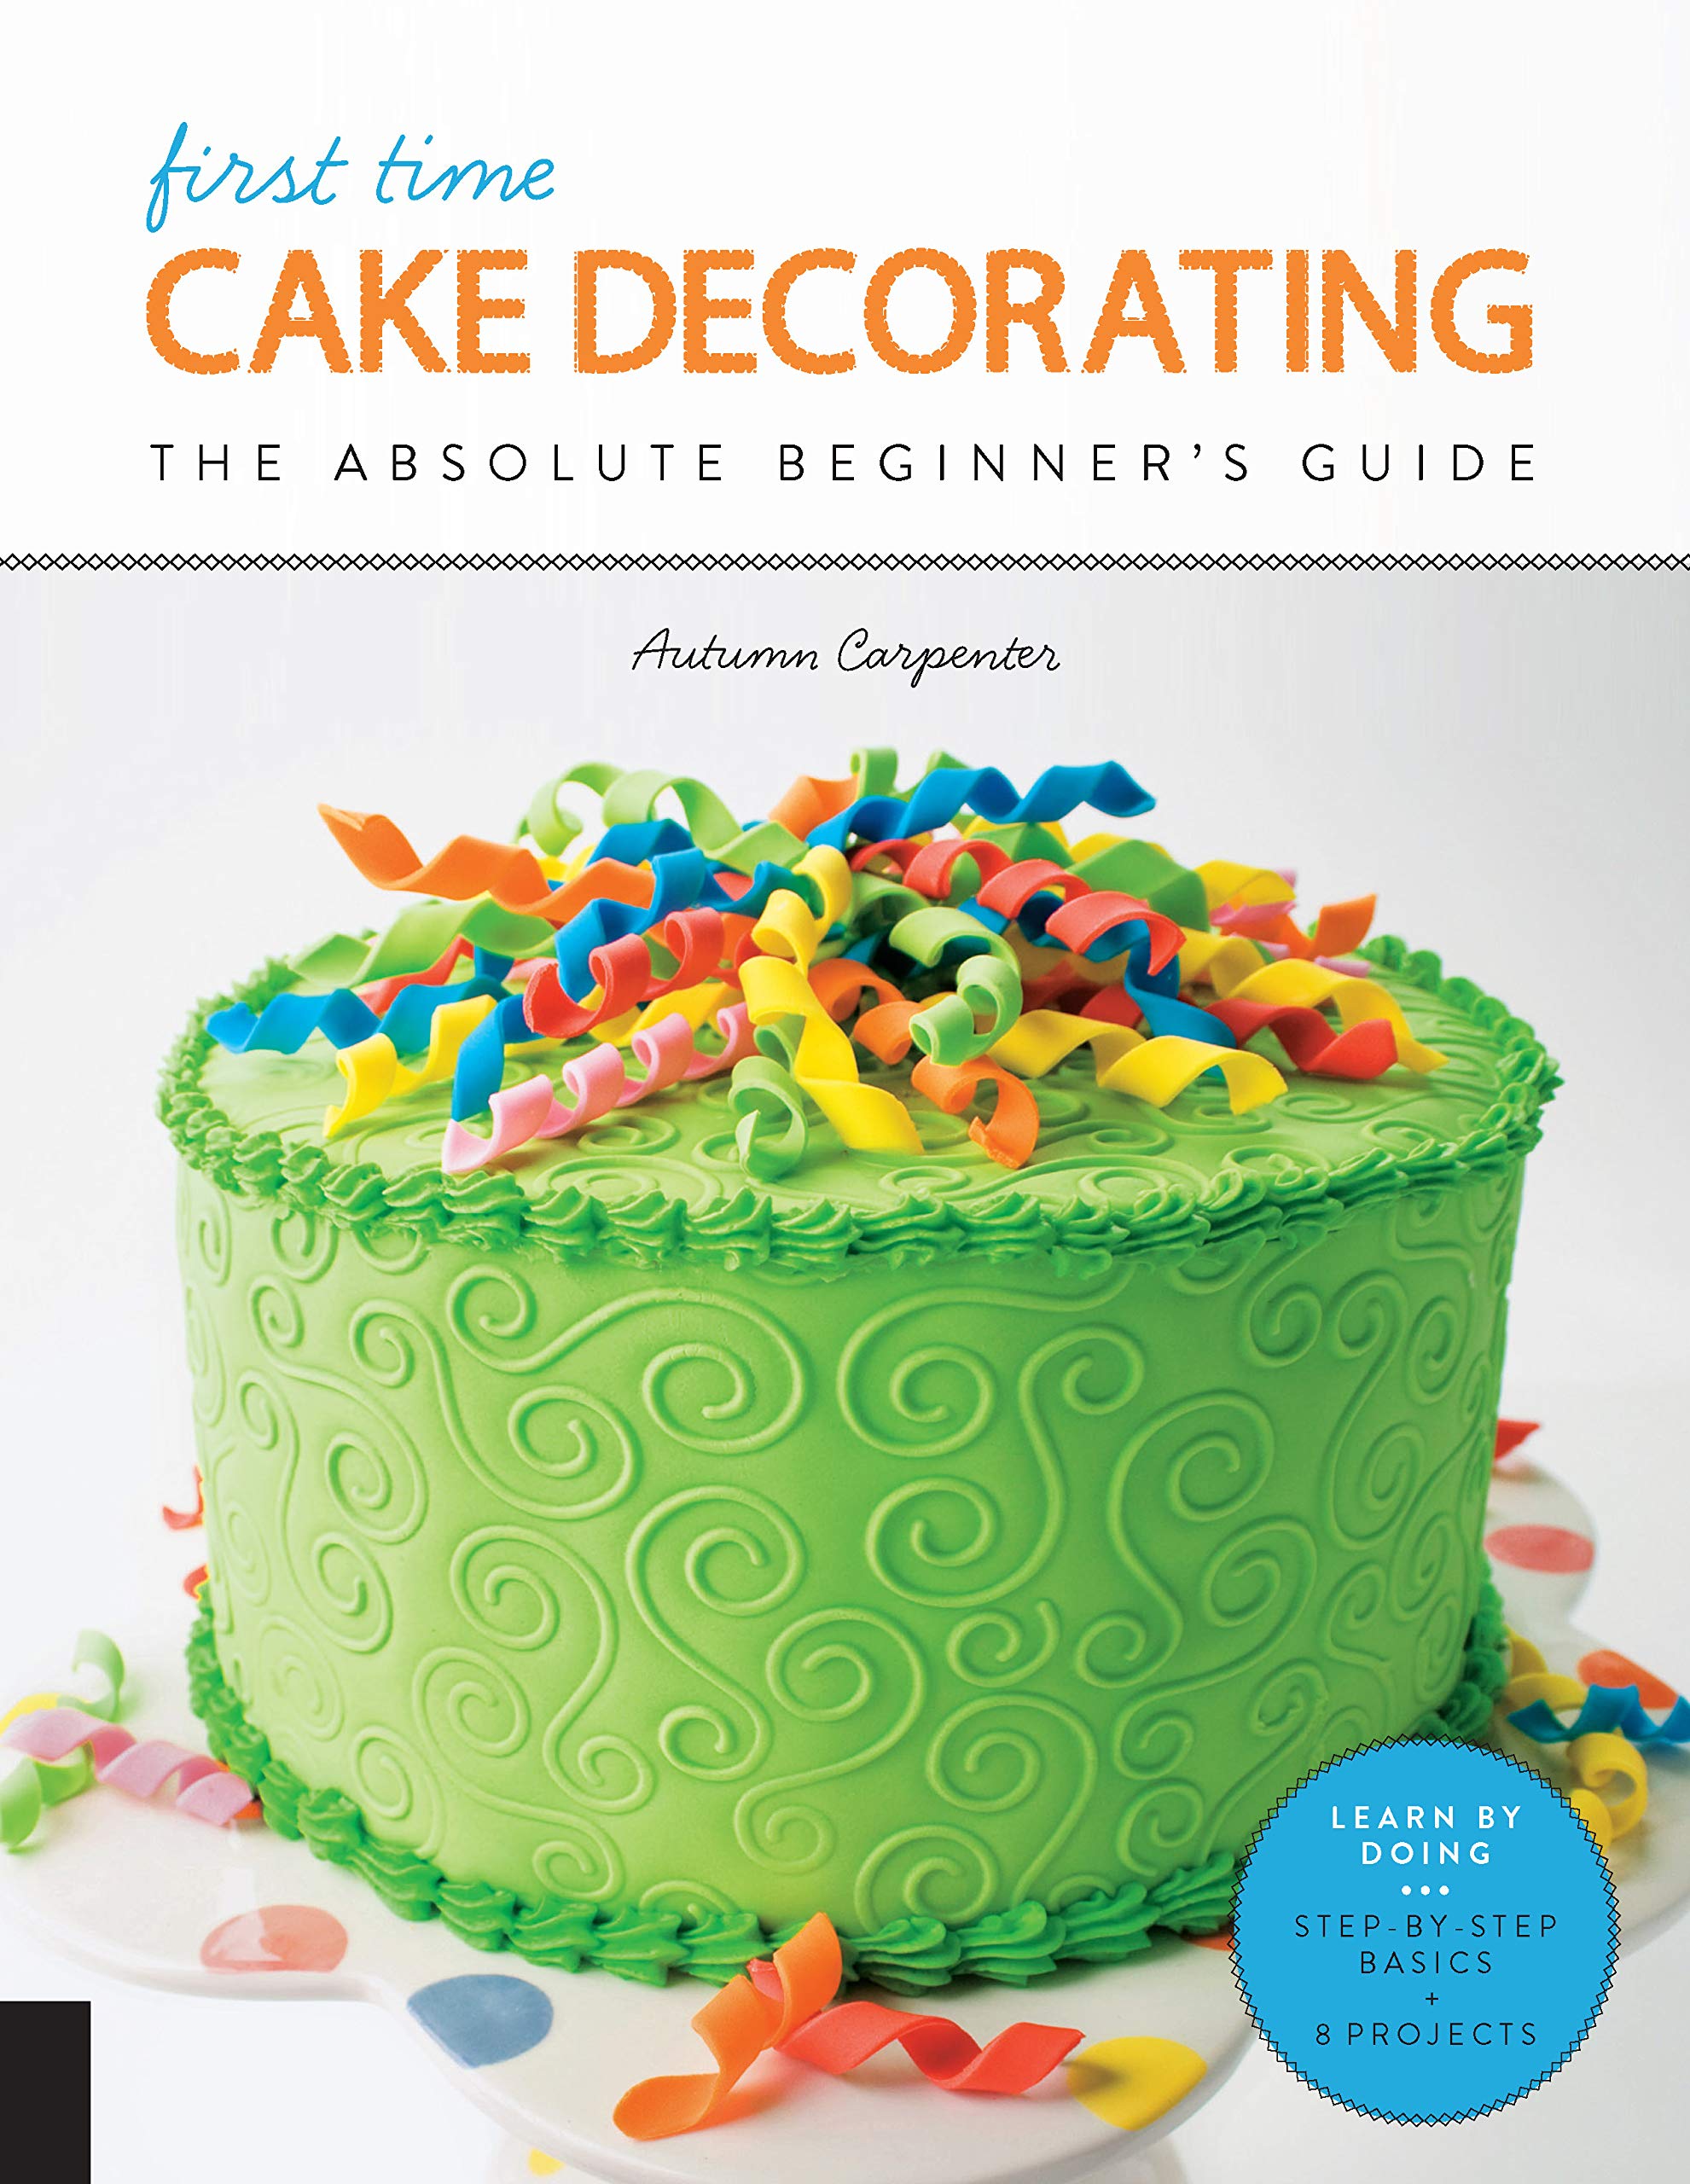 Cake Decorating Workshops and Classes | Cookery School, Didsbury